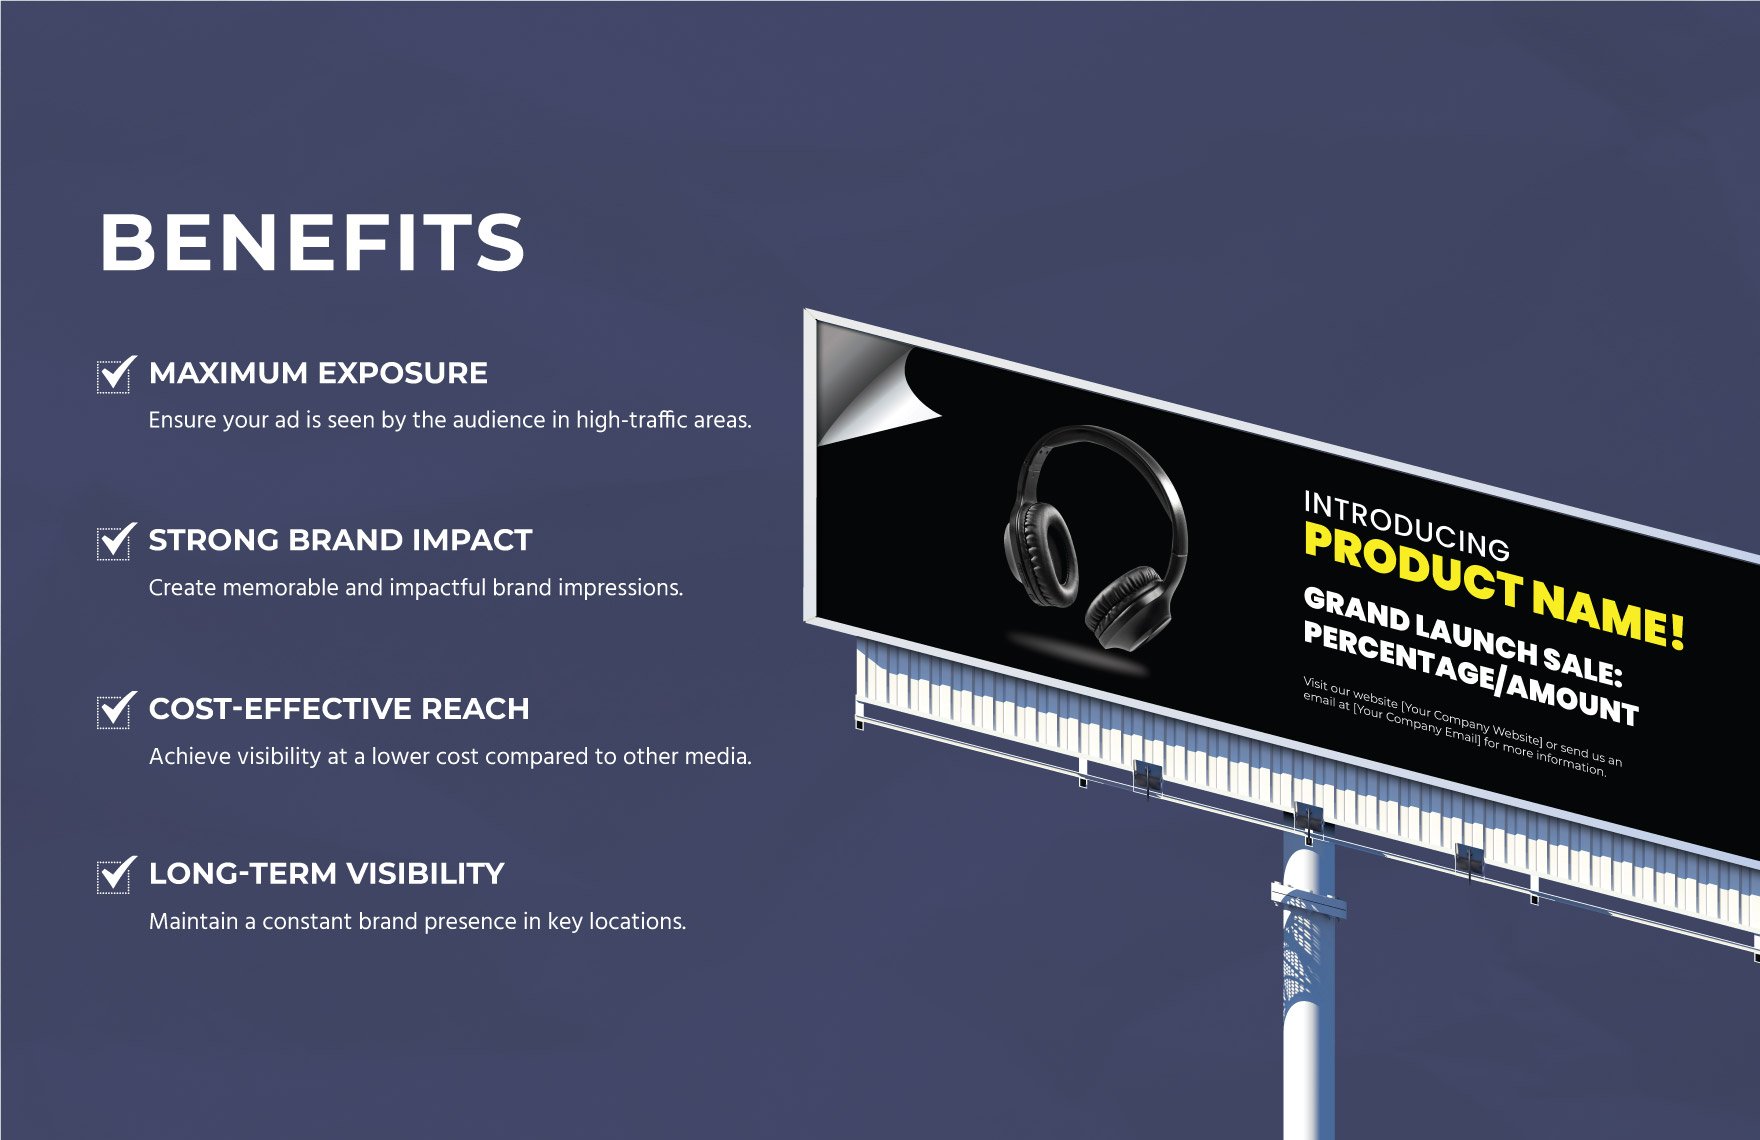 New Product Announcement Billboard Template